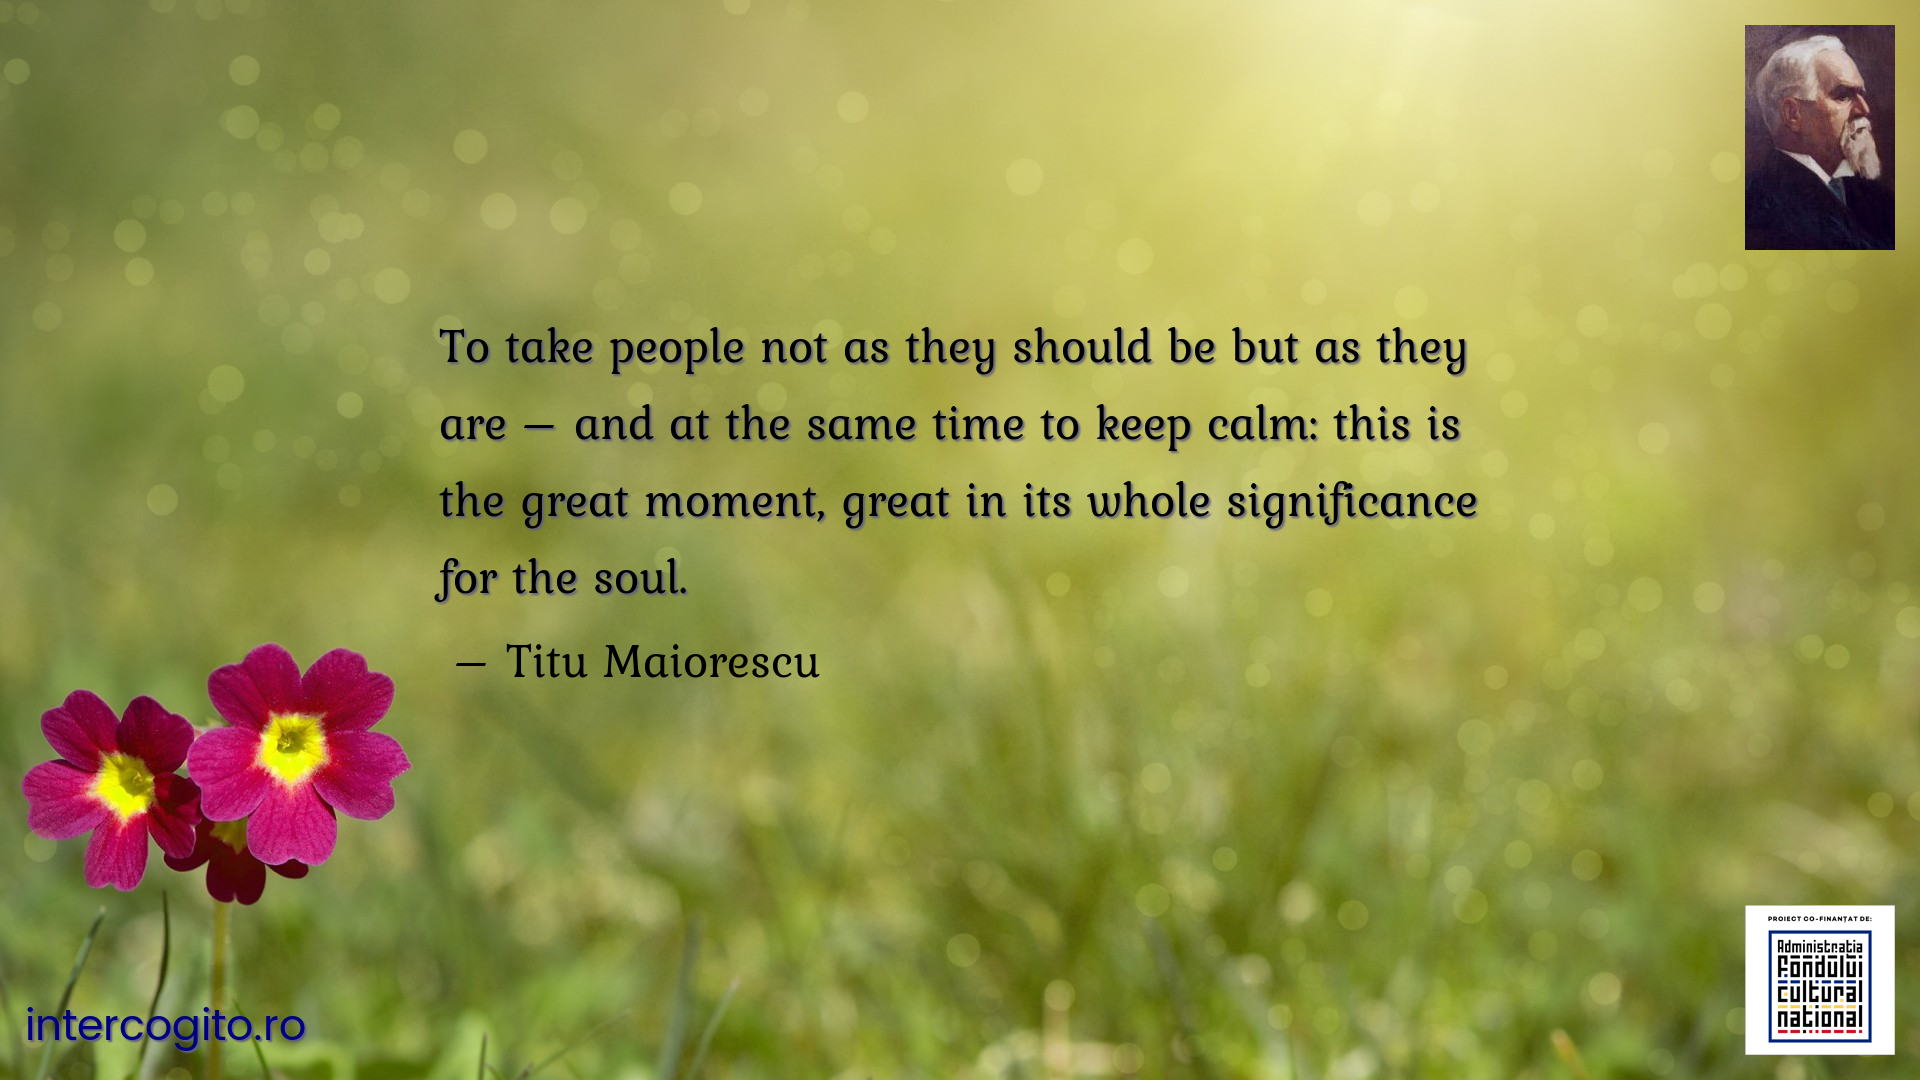 To take people not as they should be but as they are – and at the same time to keep calm: this is the great moment, great in its whole significance for the soul.